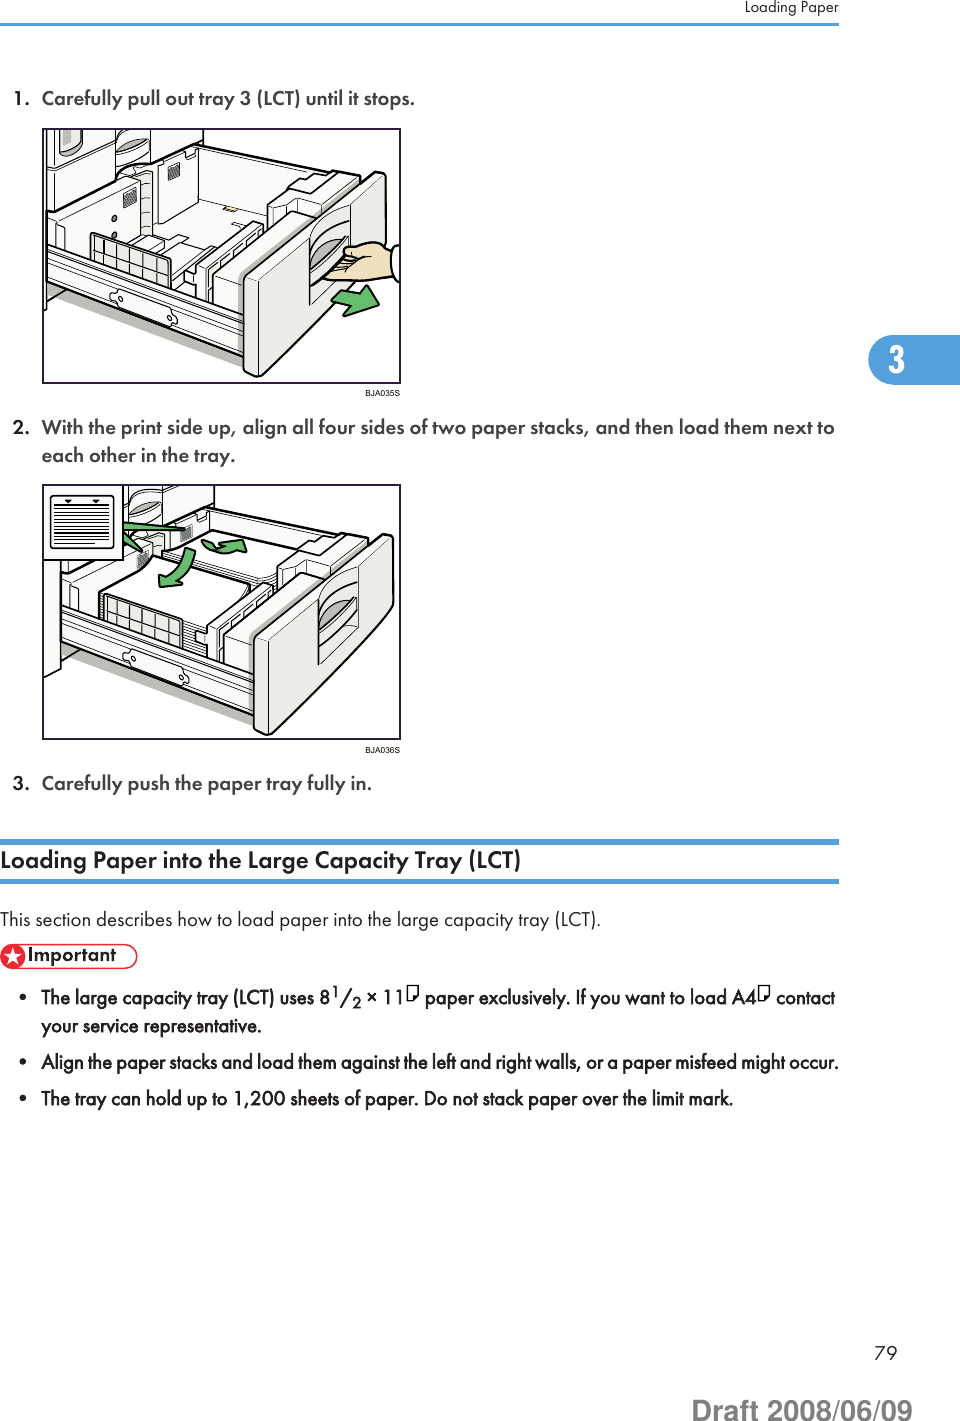 1. Carefully pull out tray 3 (LCT) until it stops.BJA035S2. With the print side up, align all four sides of two paper stacks, and then load them next toeach other in the tray.BJA036S3. Carefully push the paper tray fully in.Loading Paper into the Large Capacity Tray (LCT)This section describes how to load paper into the large capacity tray (LCT).• The large capacity tray (LCT) uses 81/2 × 11  paper exclusively. If you want to load A4  contactyour service representative.• Align the paper stacks and load them against the left and right walls, or a paper misfeed might occur.• The tray can hold up to 1,200 sheets of paper. Do not stack paper over the limit mark.Loading Paper793Draft 2008/06/09